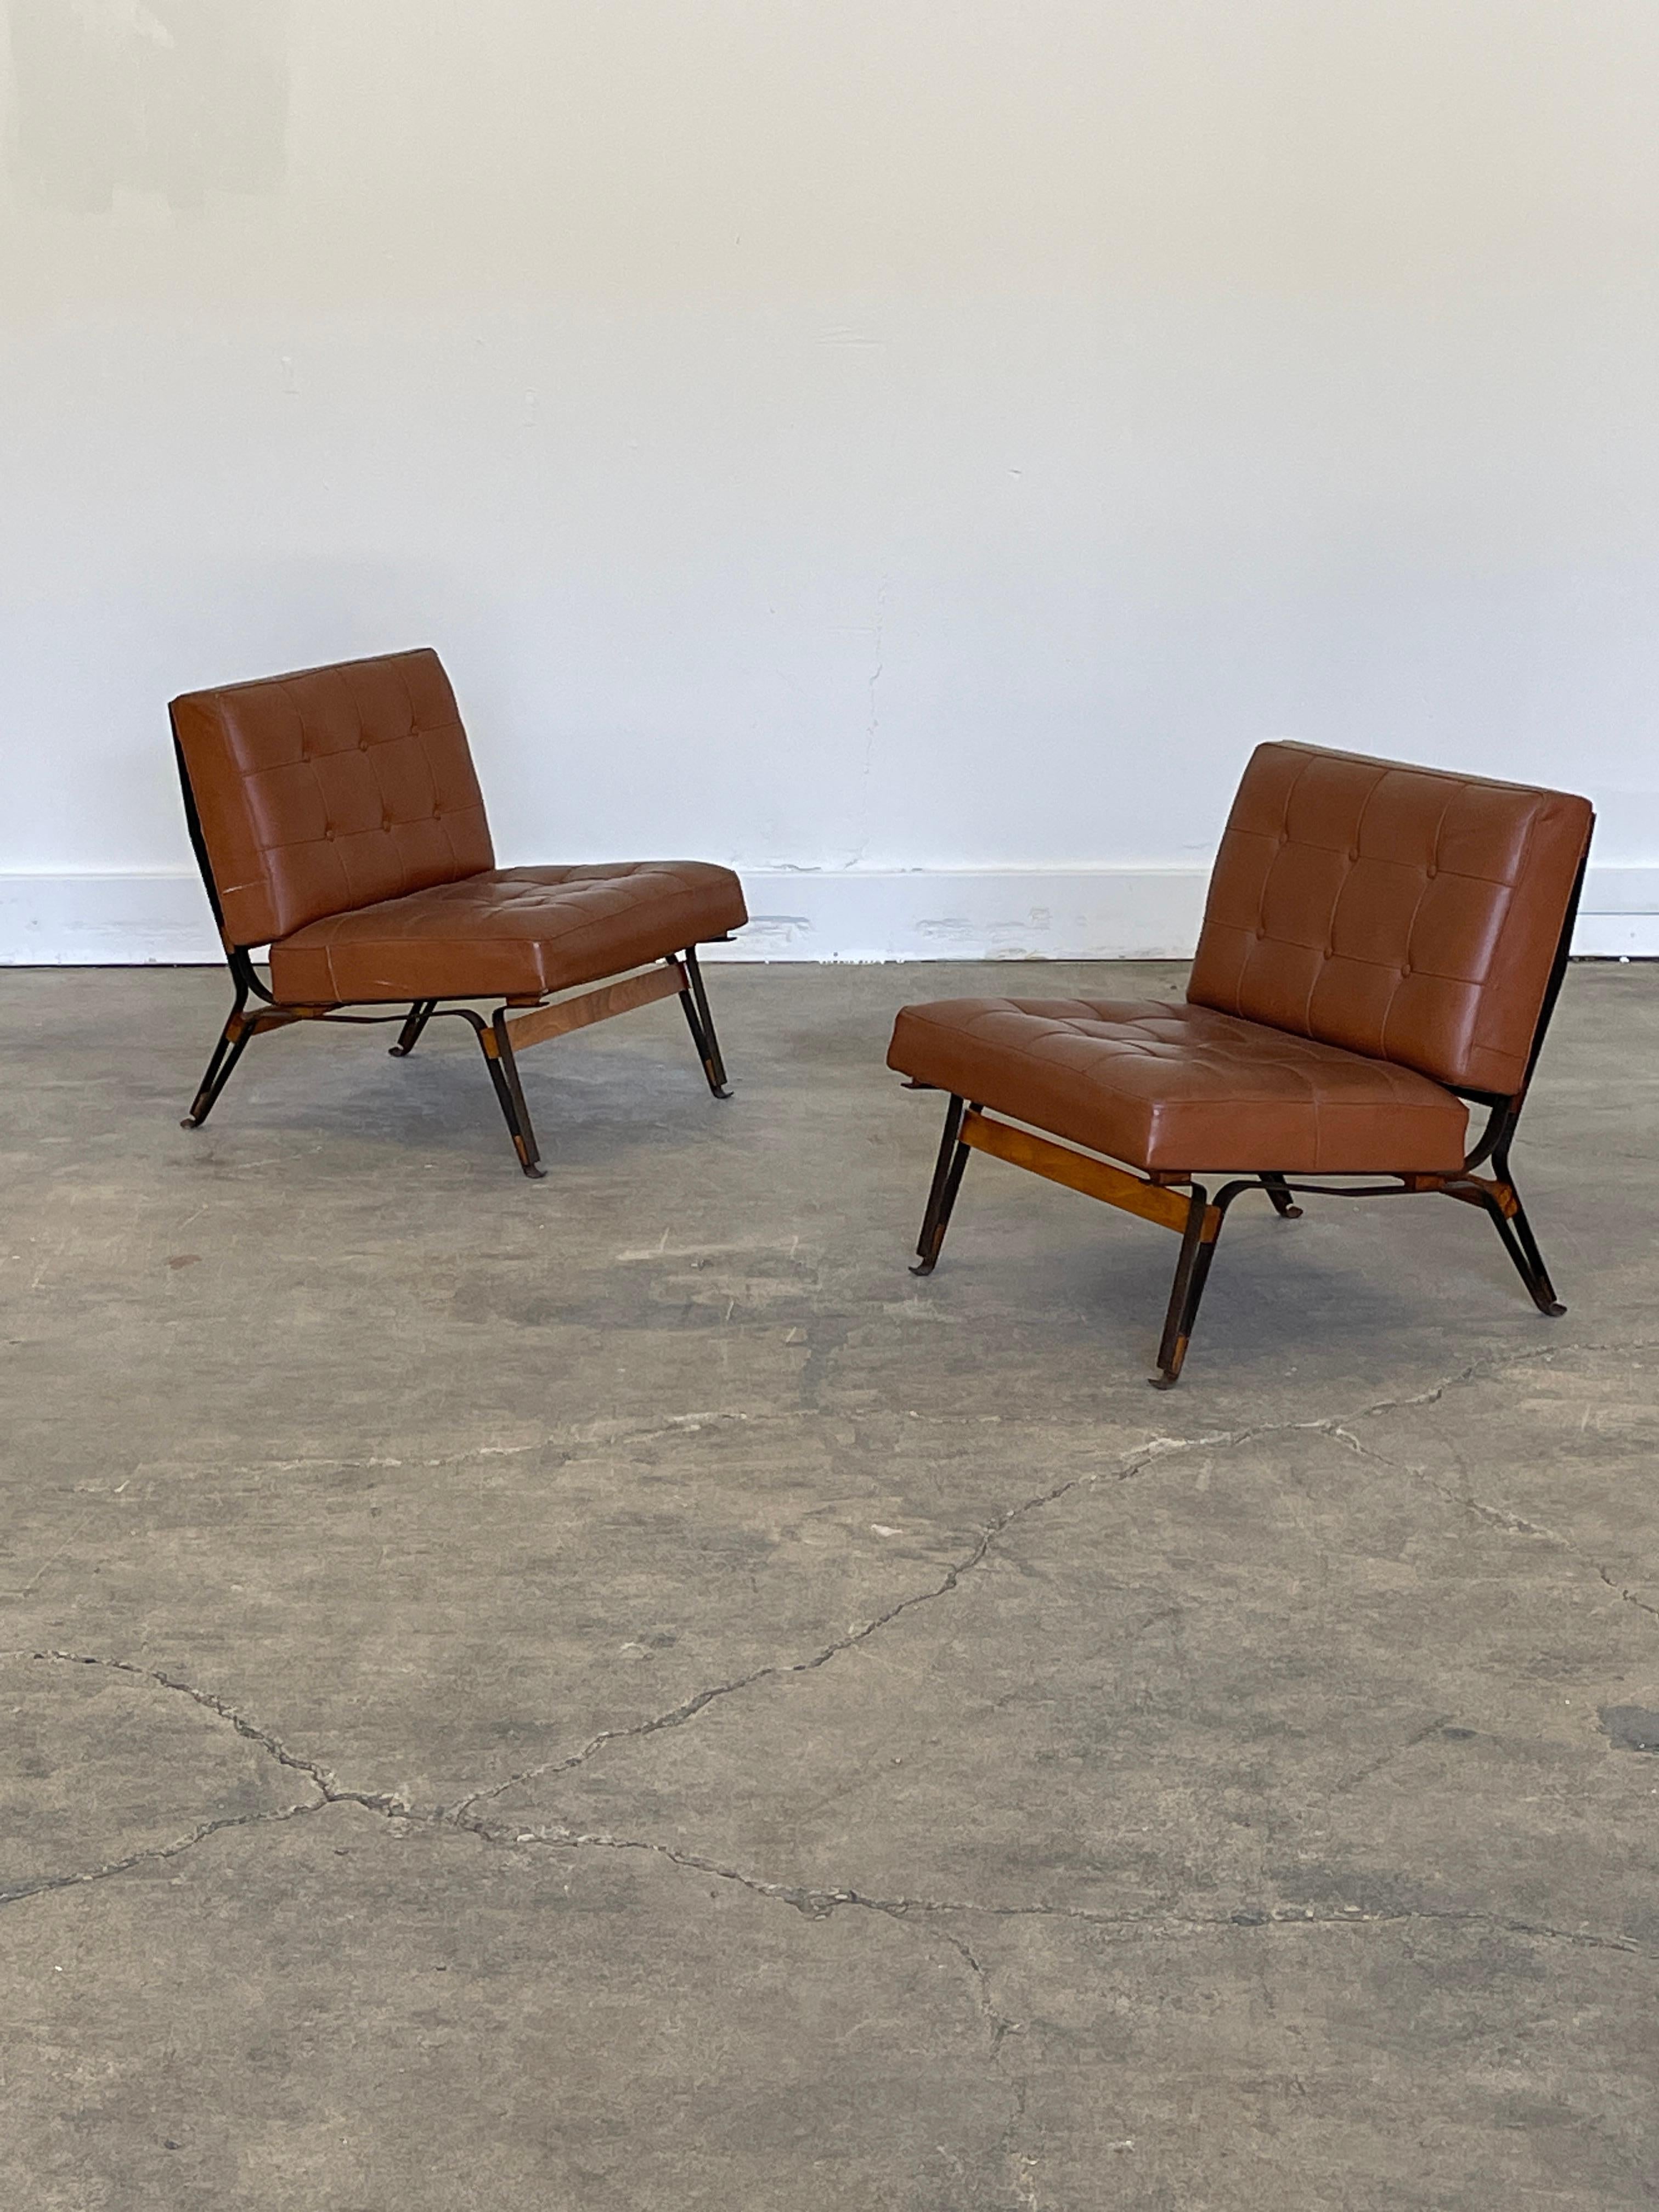 Italian Model 856 Rare Pair of Matched Leather Lounge Chairs by Ico Parisi, 1950s